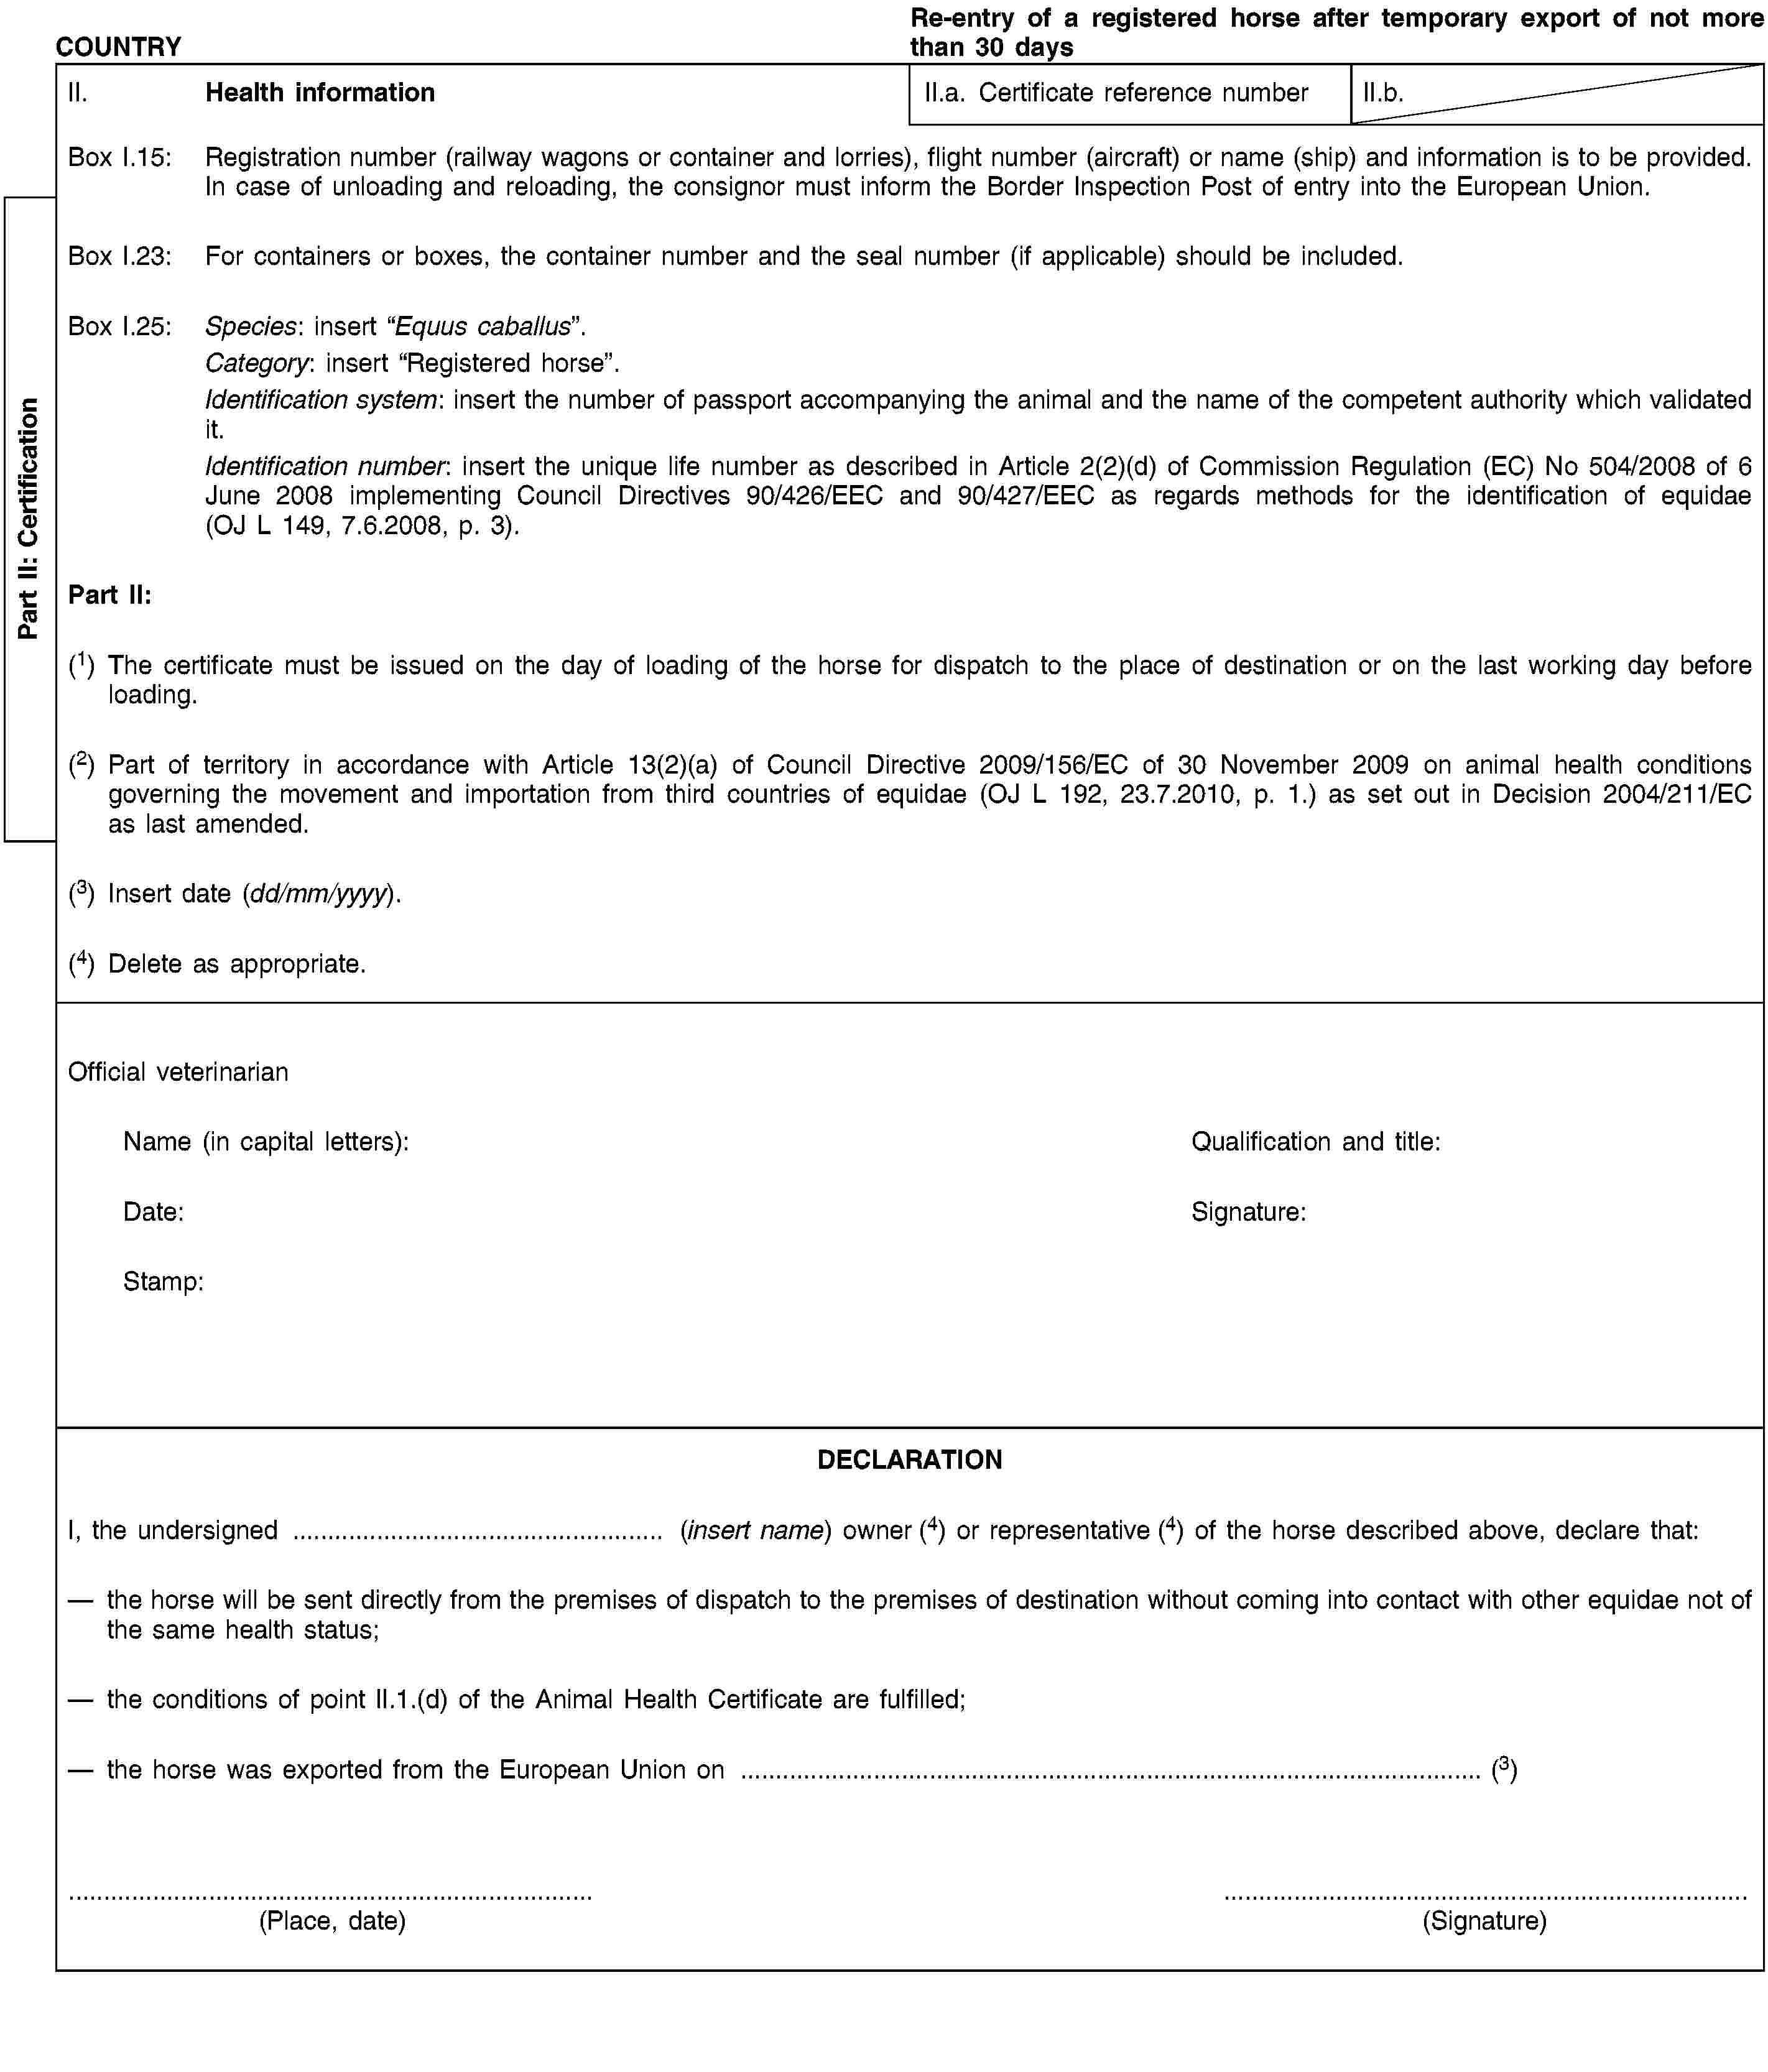 Part II: CertificationCOUNTRYRe-entry of a registered horse after temporary export of not more than 30 daysII. Health informationII.a. Certificate reference numberII.b.Box I.15: Registration number (railway wagons or container and lorries), flight number (aircraft) or name (ship) and information is to be provided. In case of unloading and reloading, the consignor must inform the Border Inspection Post of entry into the European Union.Box I.23: For containers or boxes, the container number and the seal number (if applicable) should be included.Box I.25: Species: insert “Equus caballus”.Category: insert “Registered horse”.Identification system: insert the number of passport accompanying the animal and the name of the competent authority which validated it.Identification number: insert the unique life number as described in Article 2(2)(d) of Commission Regulation (EC) No 504/2008 of 6 June 2008 implementing Council Directives 90/426/EEC and 90/427/EEC as regards methods for the identification of equidae (OJ L 149, 7.6.2008, p. 3).Part II:(1) The certificate must be issued on the day of loading of the horse for dispatch to the place of destination or on the last working day before loading.(2) Part of territory in accordance with Article 13(2)(a) of Council Directive 2009/156/EC of 30 November 2009 on animal health conditions governing the movement and importation from third countries of equidae (OJ L 192, 23.7.2010, p. 1.) as set out in Decision 2004/211/EC as last amended.(3) Insert date (dd/mm/yyyy).(4) Delete as appropriate.Official veterinarianName (in capital letters):Qualification and title:Date:Signature:Stamp:DECLARATIONI, the undersigned … (insert name) owner (4) or representative (4) of the horse described above, declare that:the horse will be sent directly from the premises of dispatch to the premises of destination without coming into contact with other equidae not of the same health status;the conditions of point II.1.(d) of the Animal Health Certificate are fulfilled;the horse was exported from the European Union on … (3)(Place, date)(Signature)